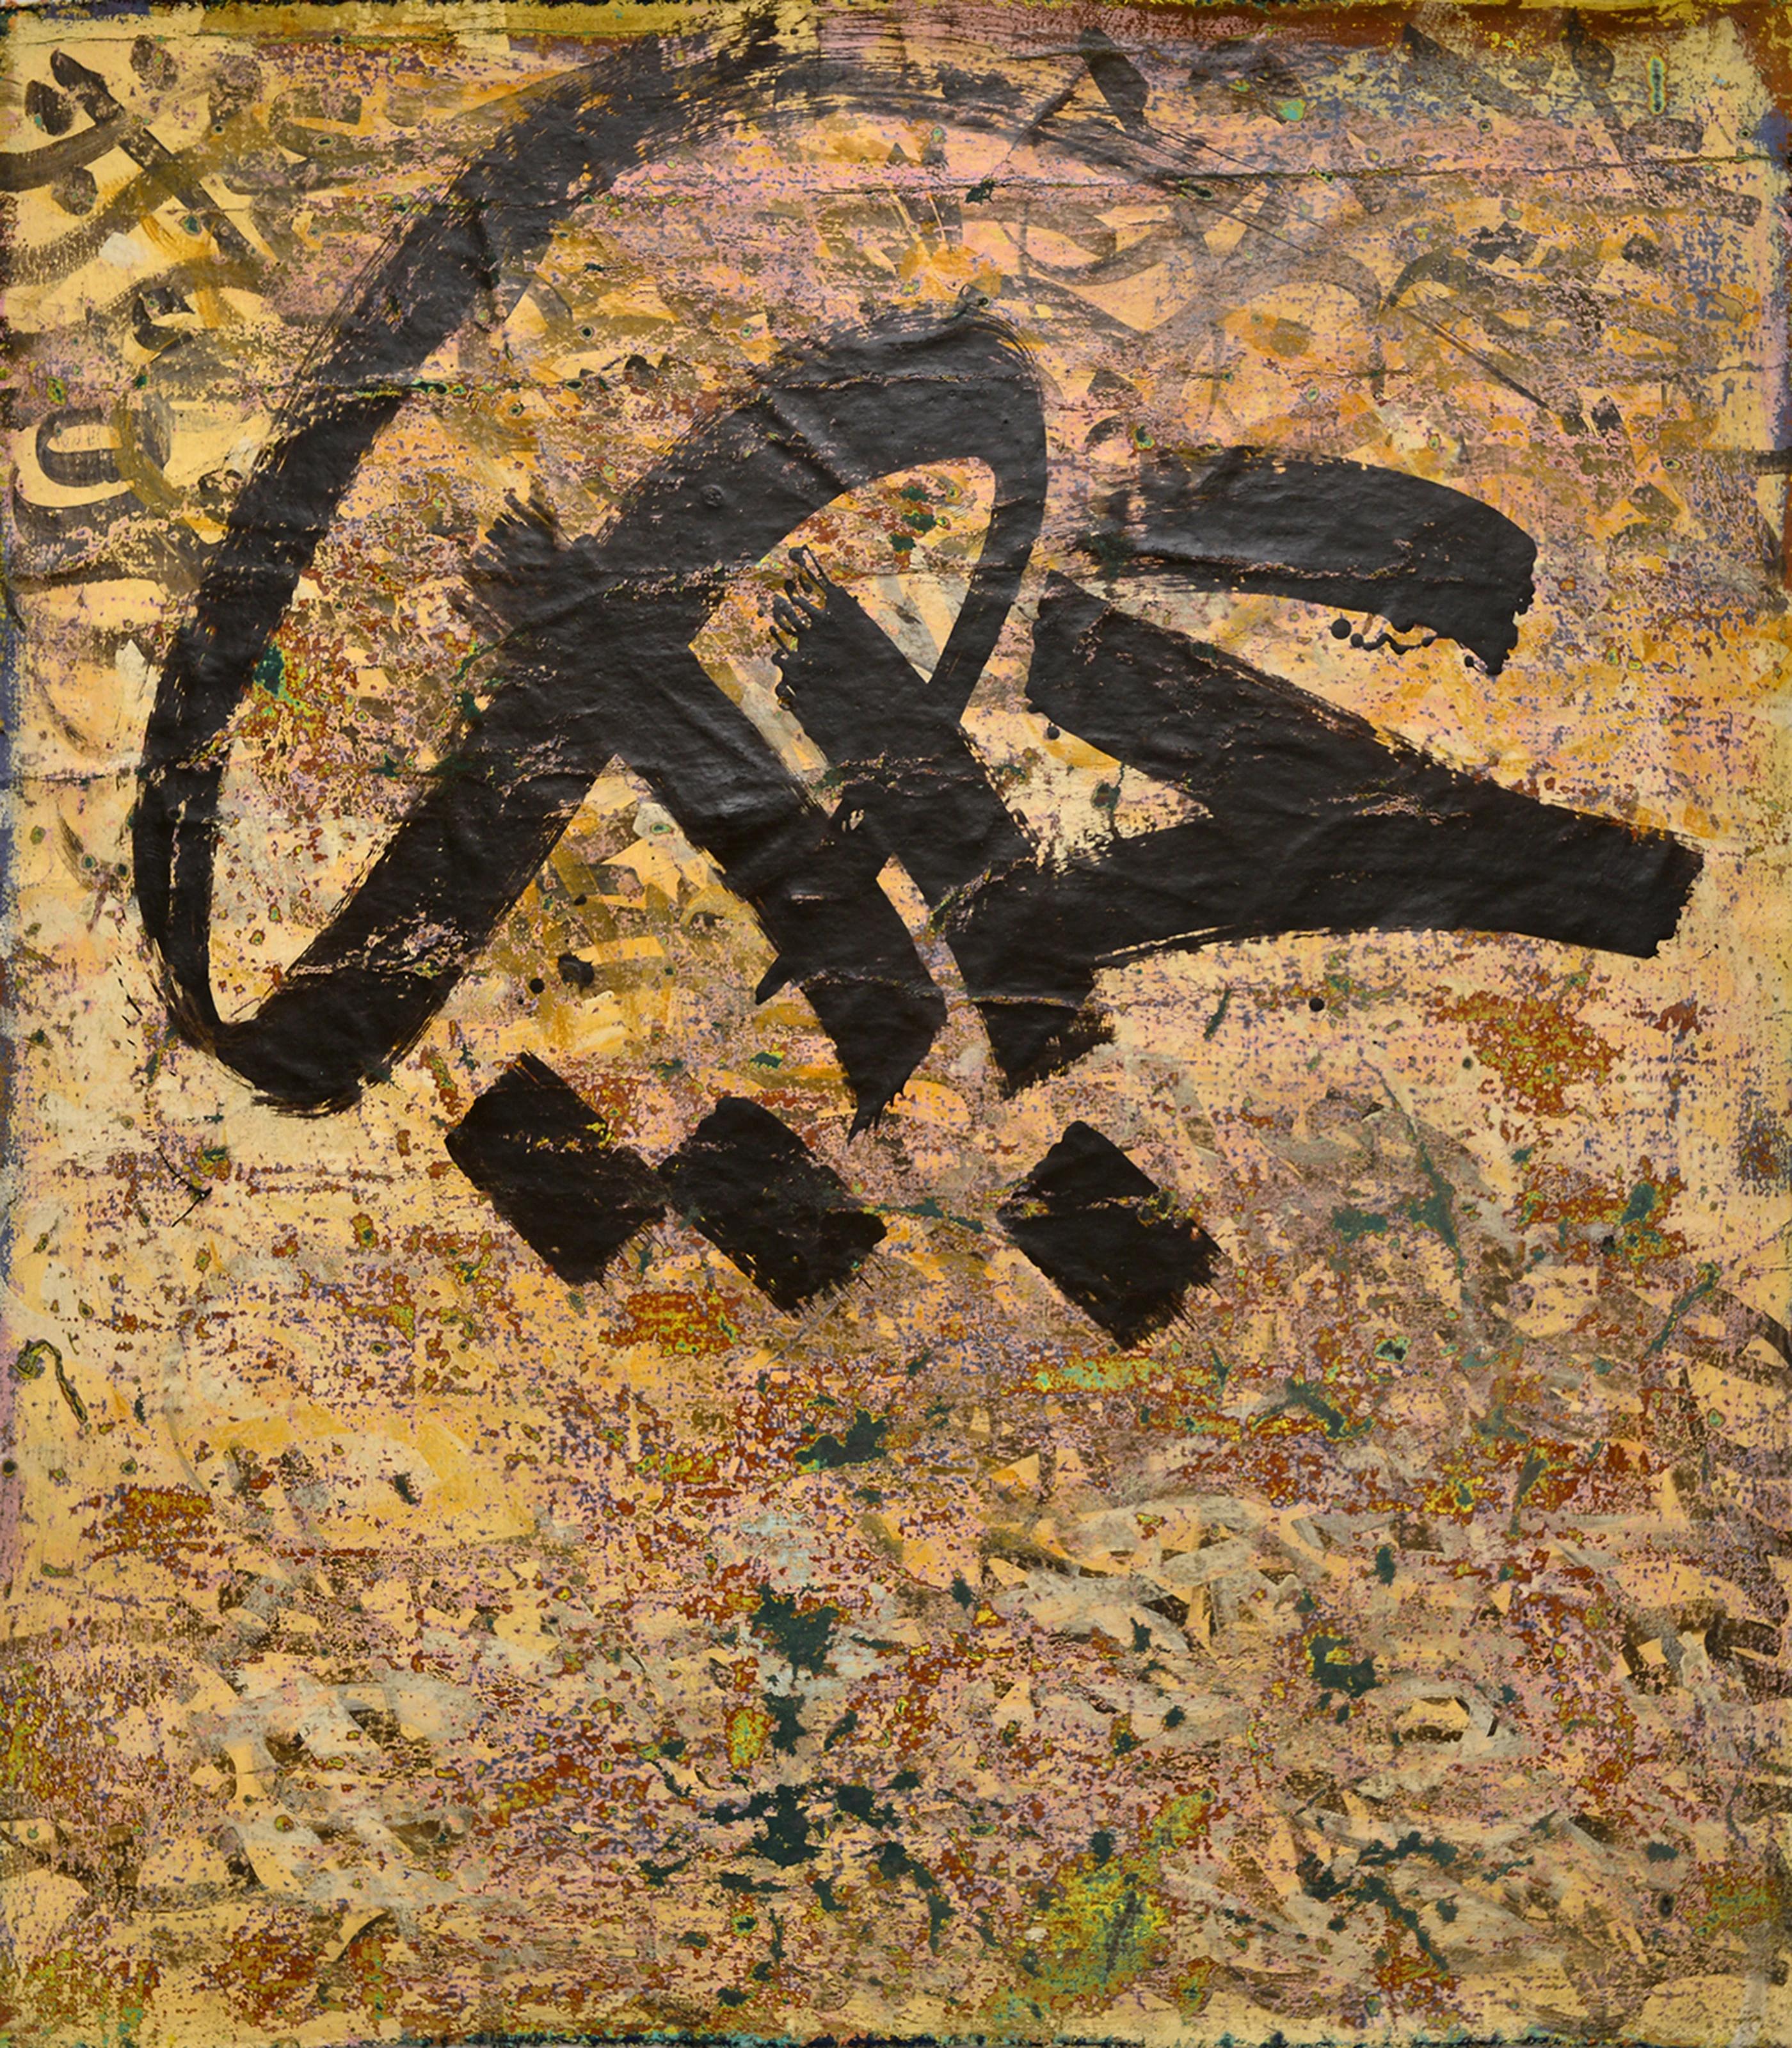 "Abstract Calligraphy" Abstract Painting 55" x 55" inch by Ibrahim Khatab

Ibrahim Khatab was born in Cairo 1984, works as a co-teacher in Cairo University, he mixes between painting, video art and installation in his artworks. He started since his